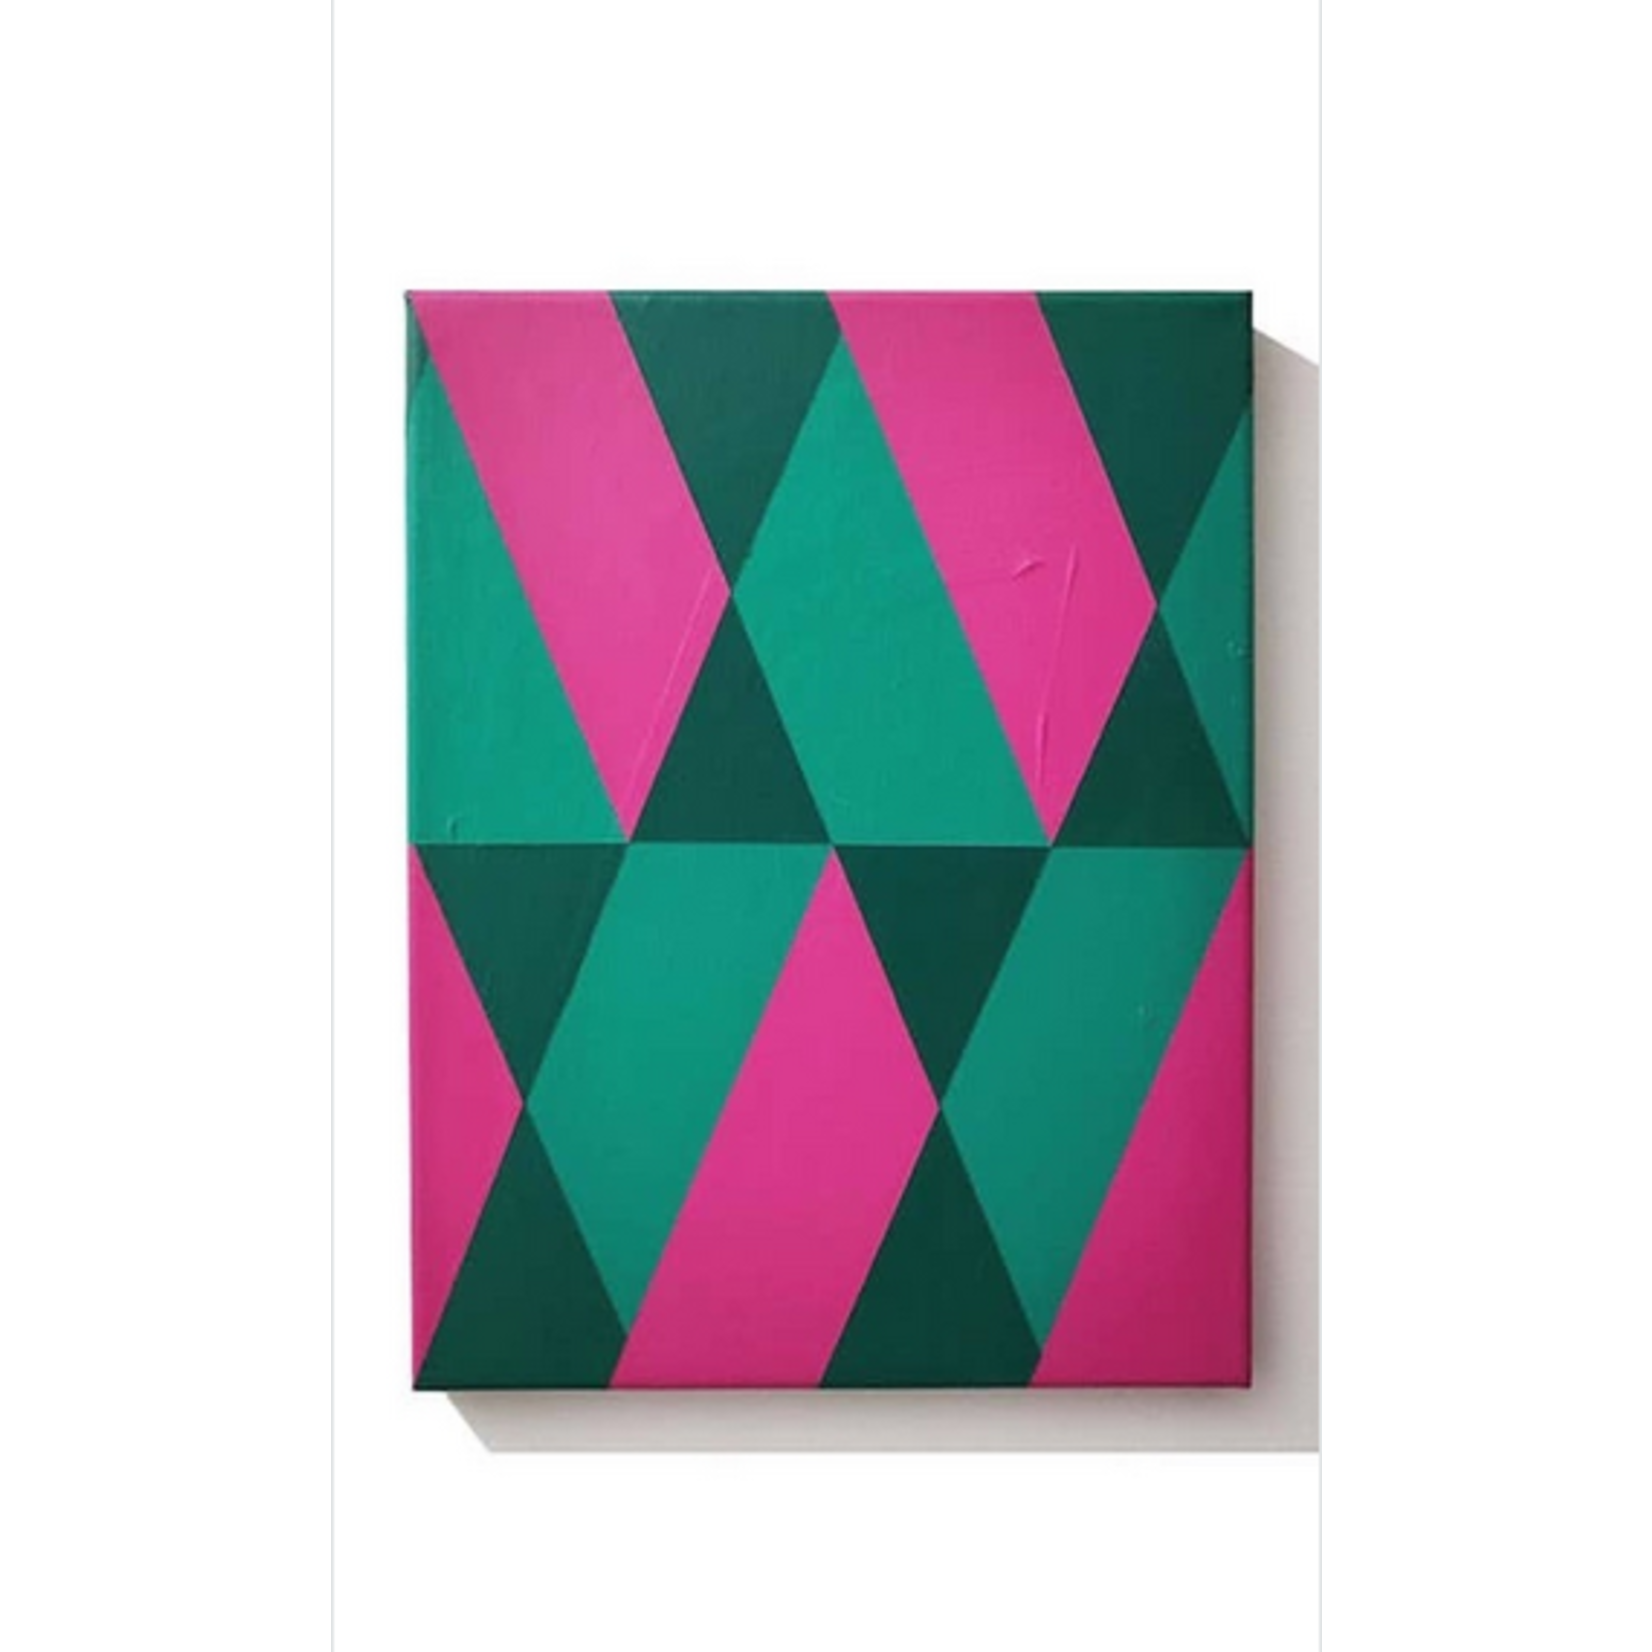 Stretched Print on Canvas Assembly 05 by Rodrigo Martin